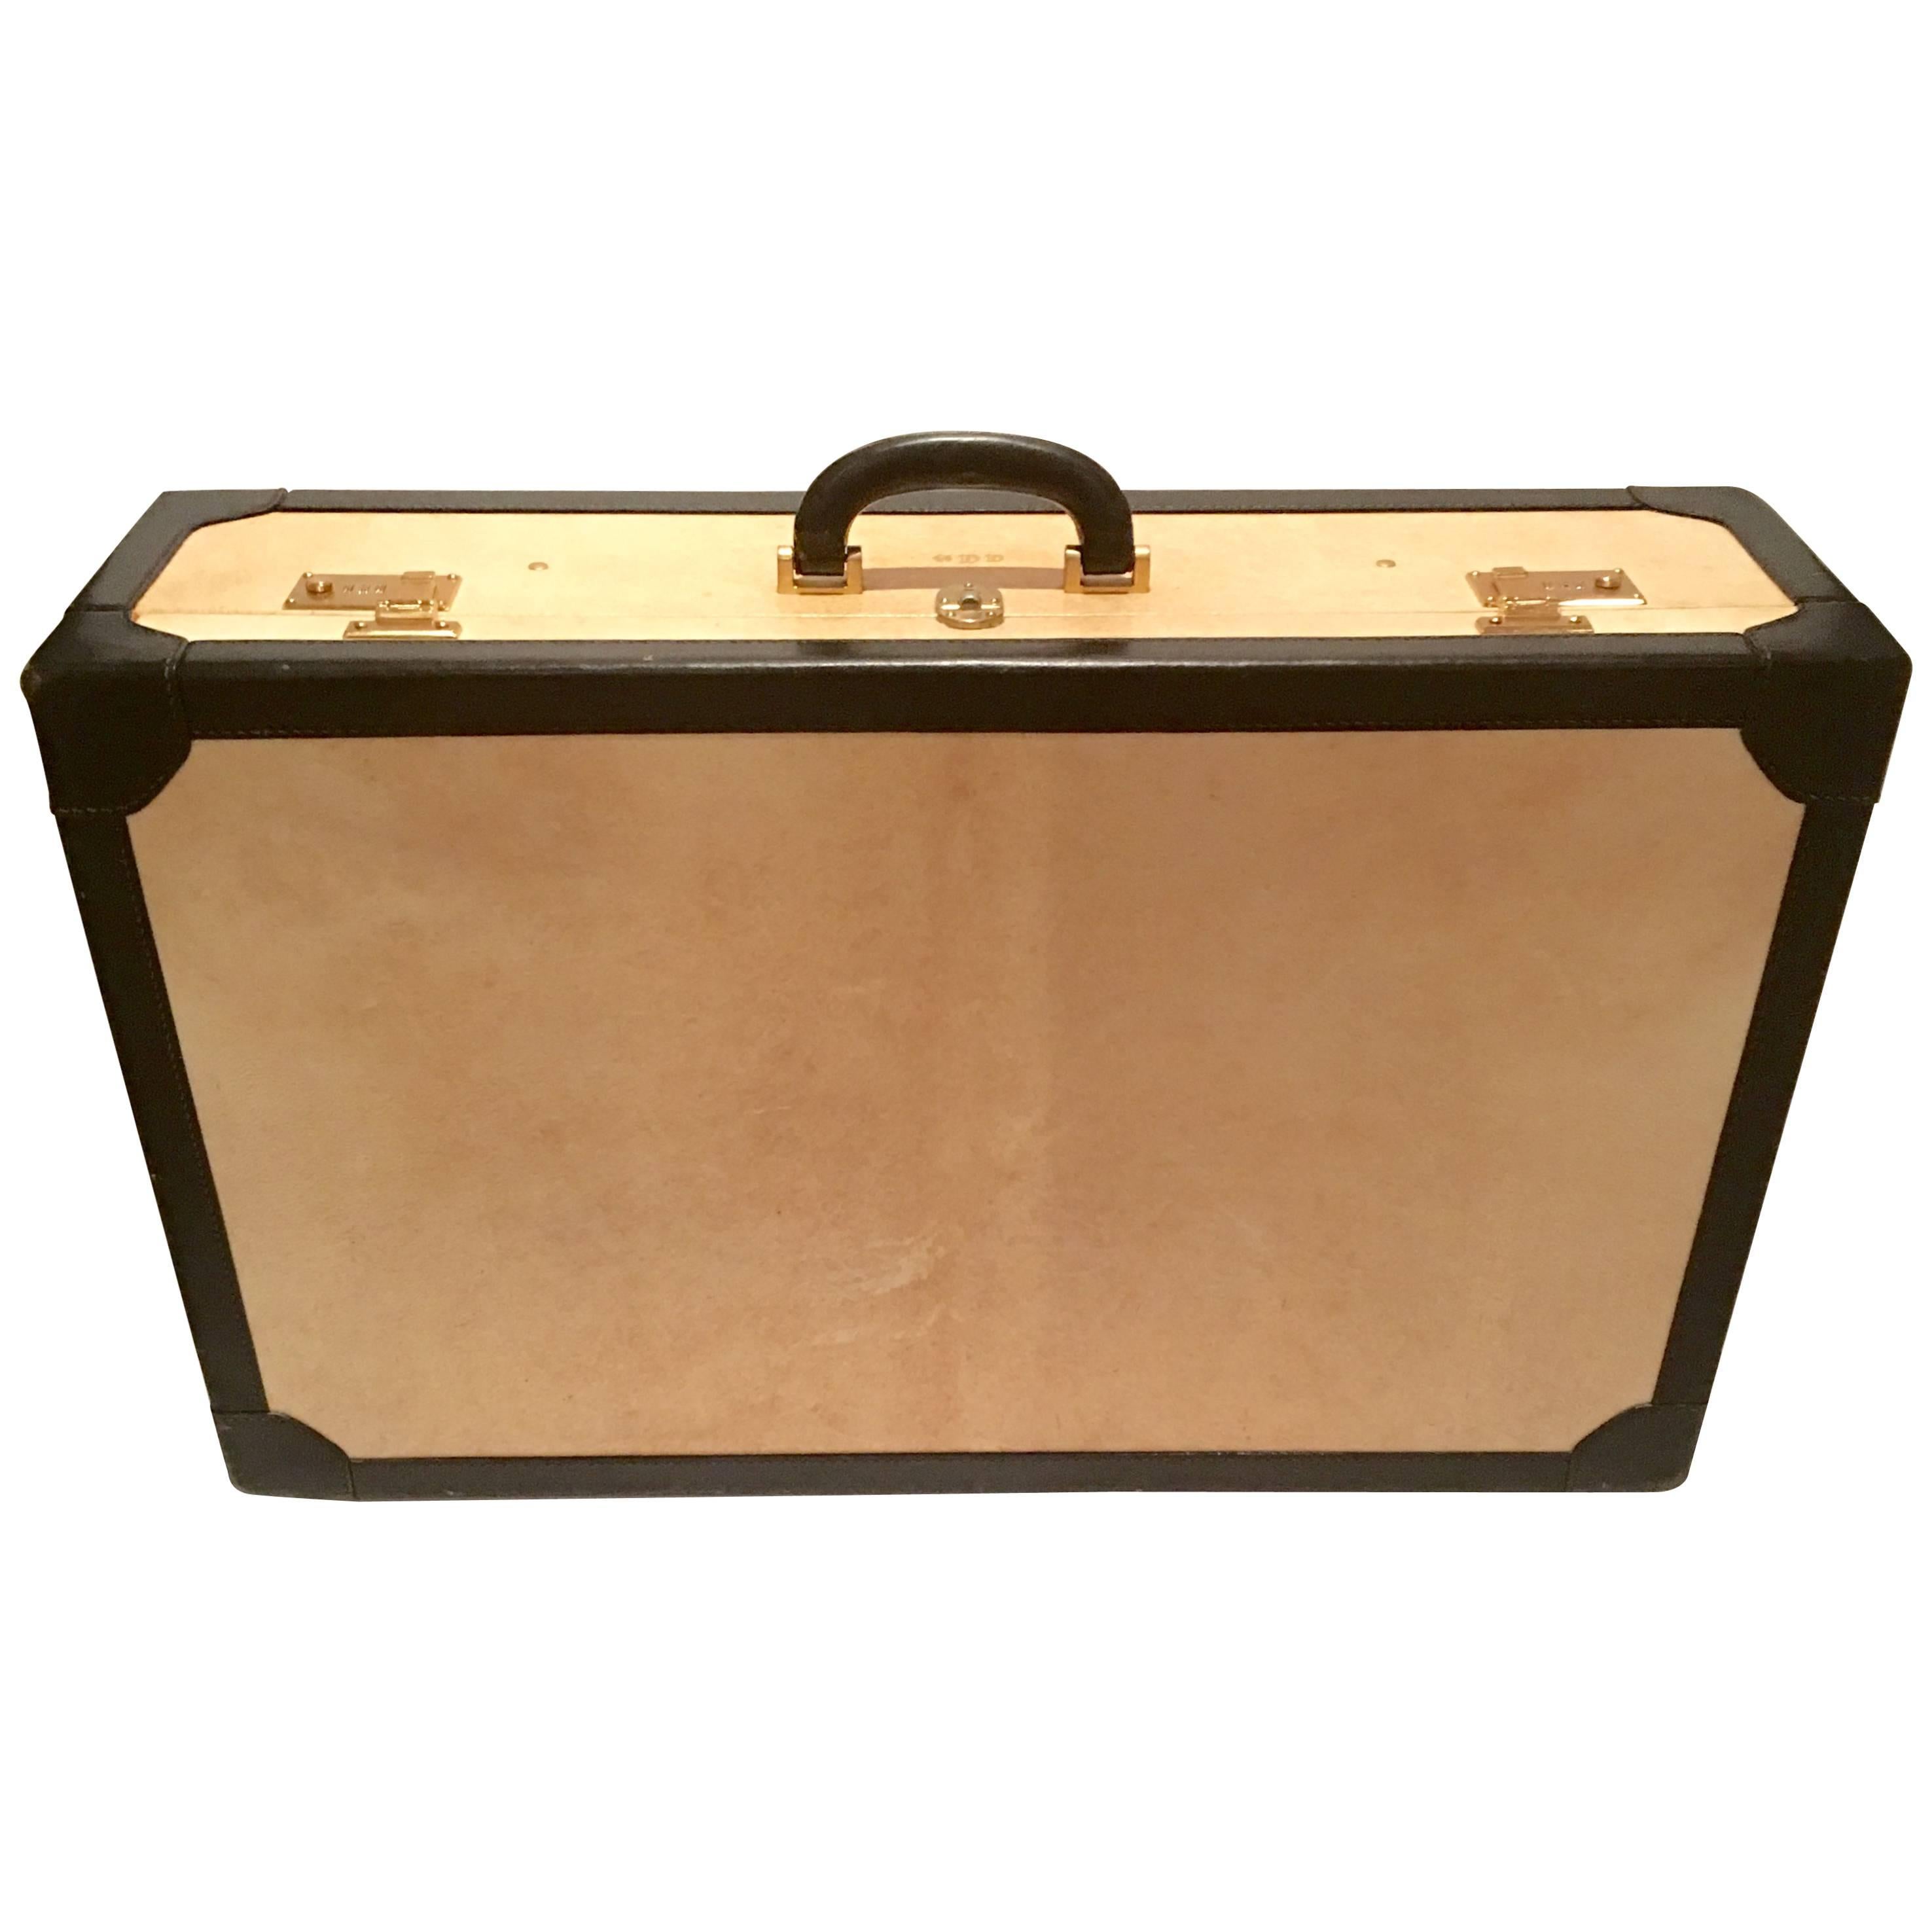 Vintage Italian Vellum and Leather Suitcase Made for Barney's New York